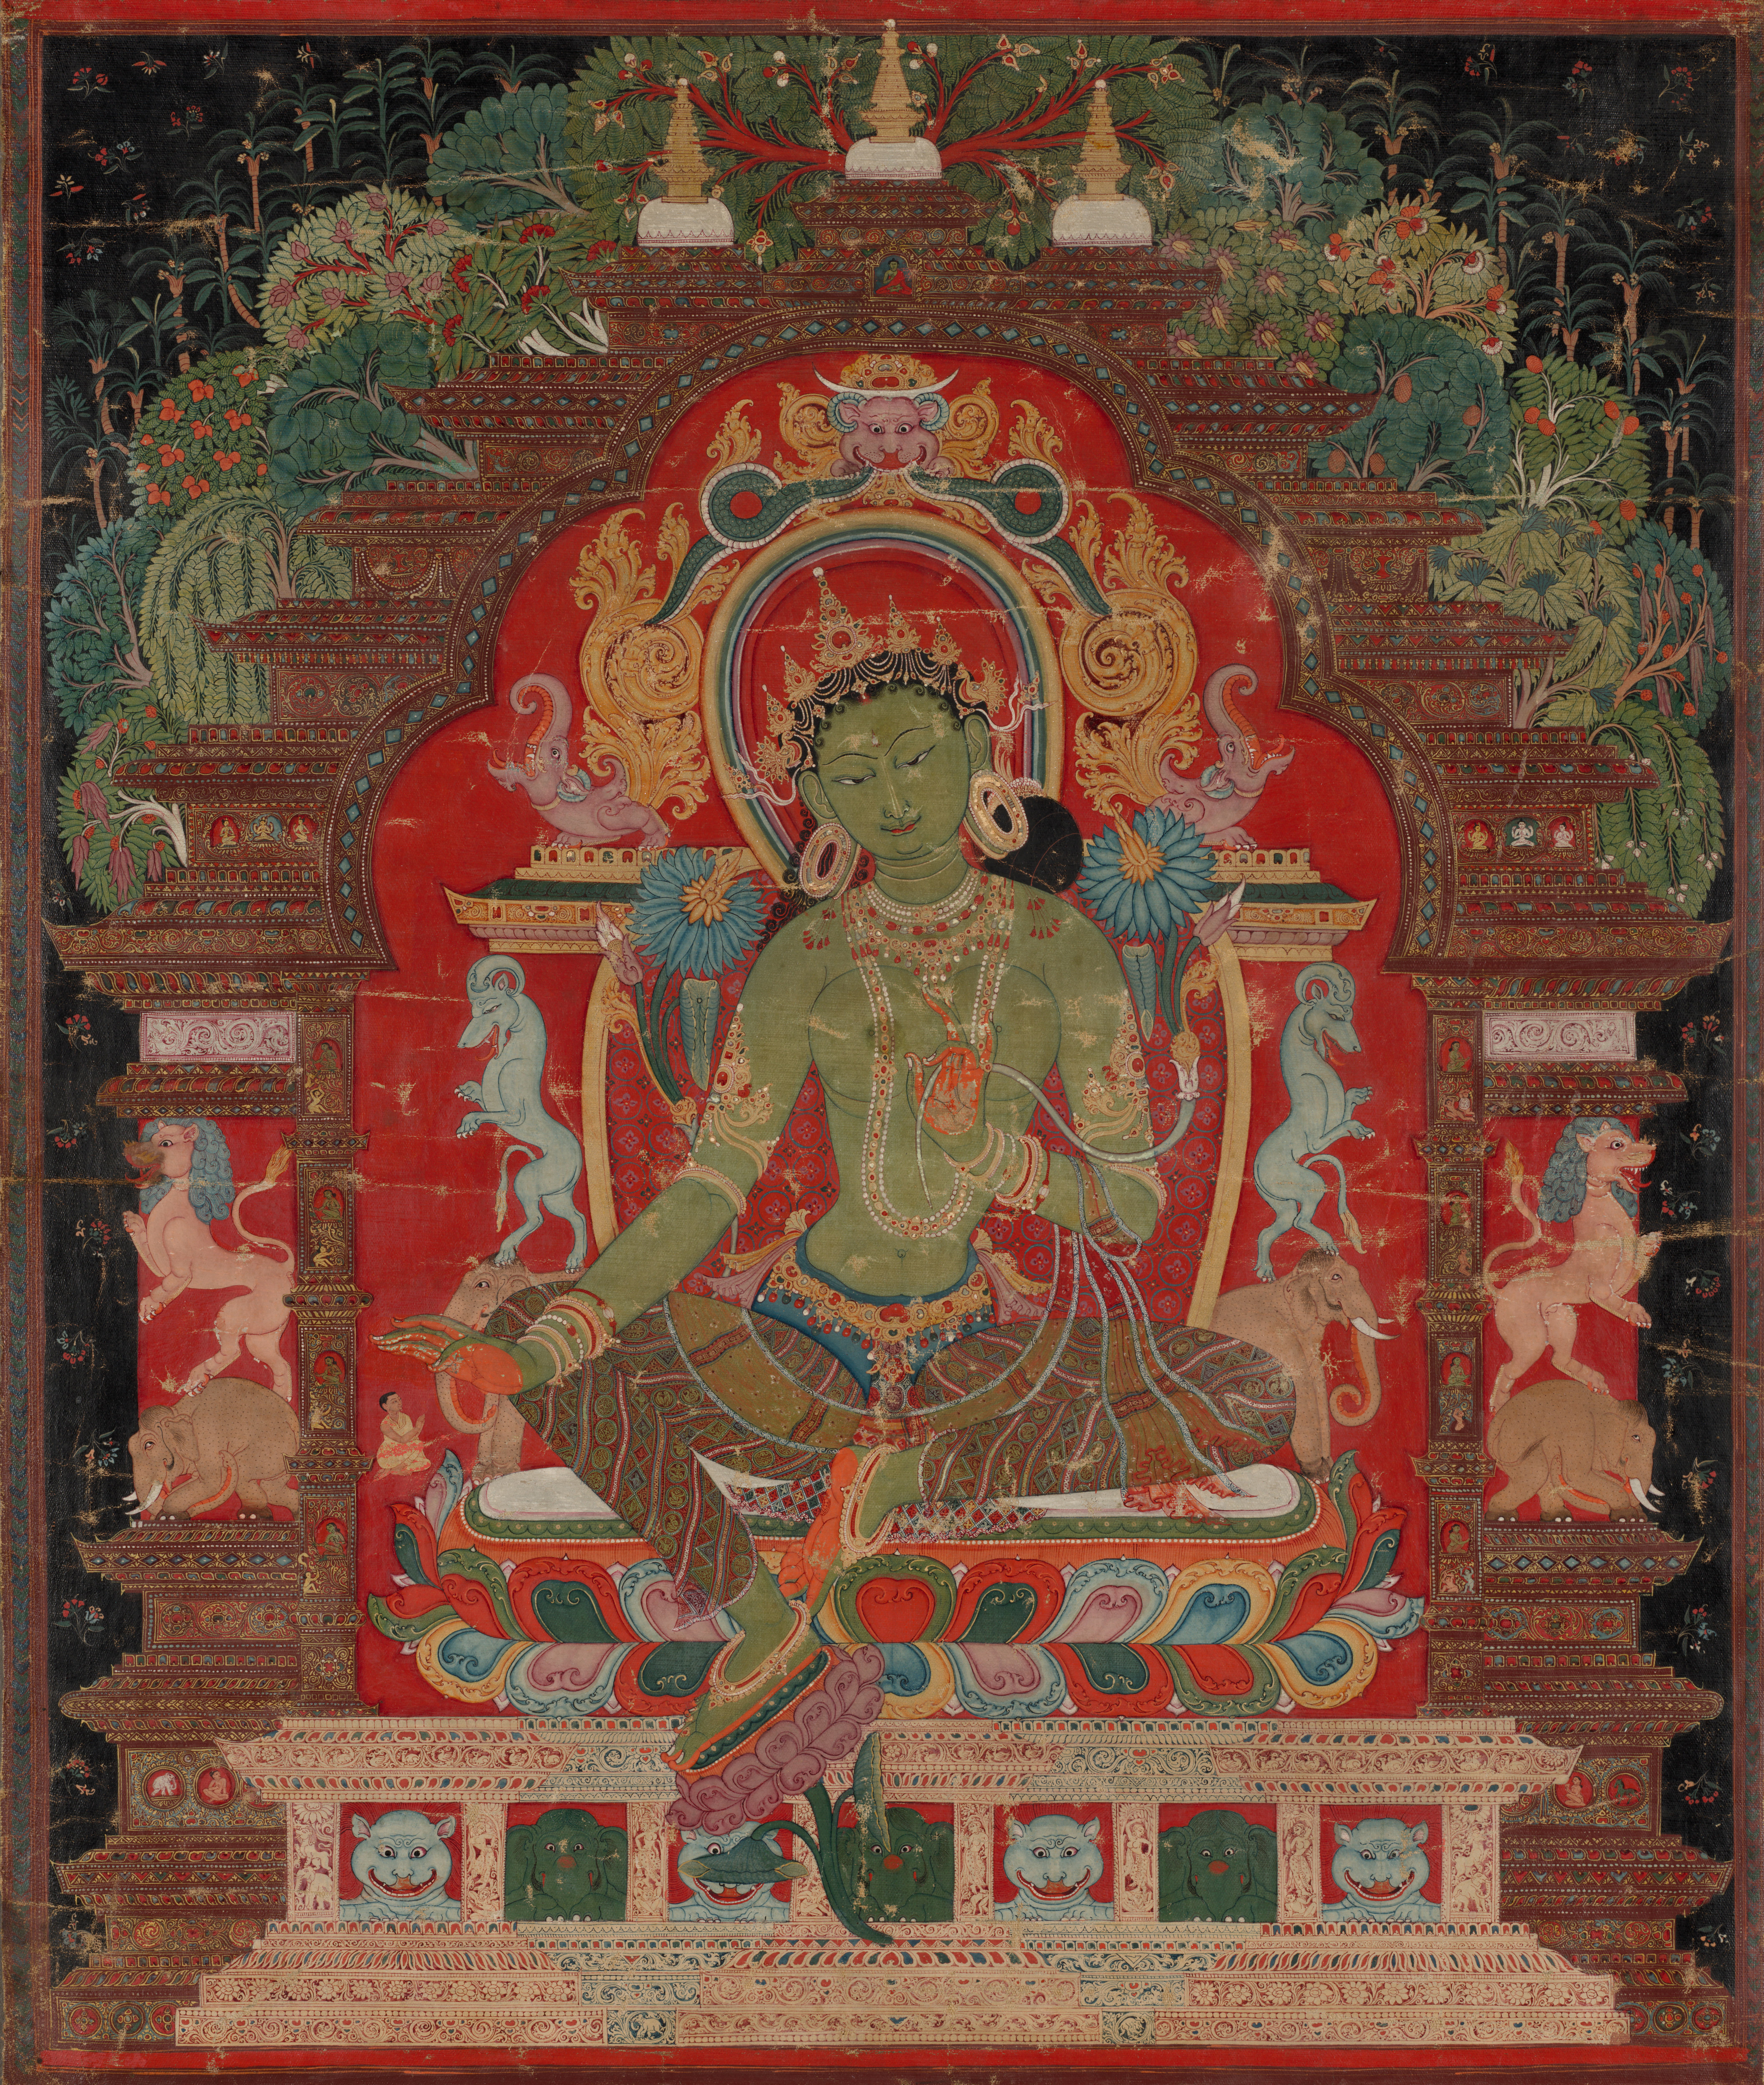 Green-skinned Bodhisattva seated on throne decorated with animals and stupas; Left foot rests on lotus blossom